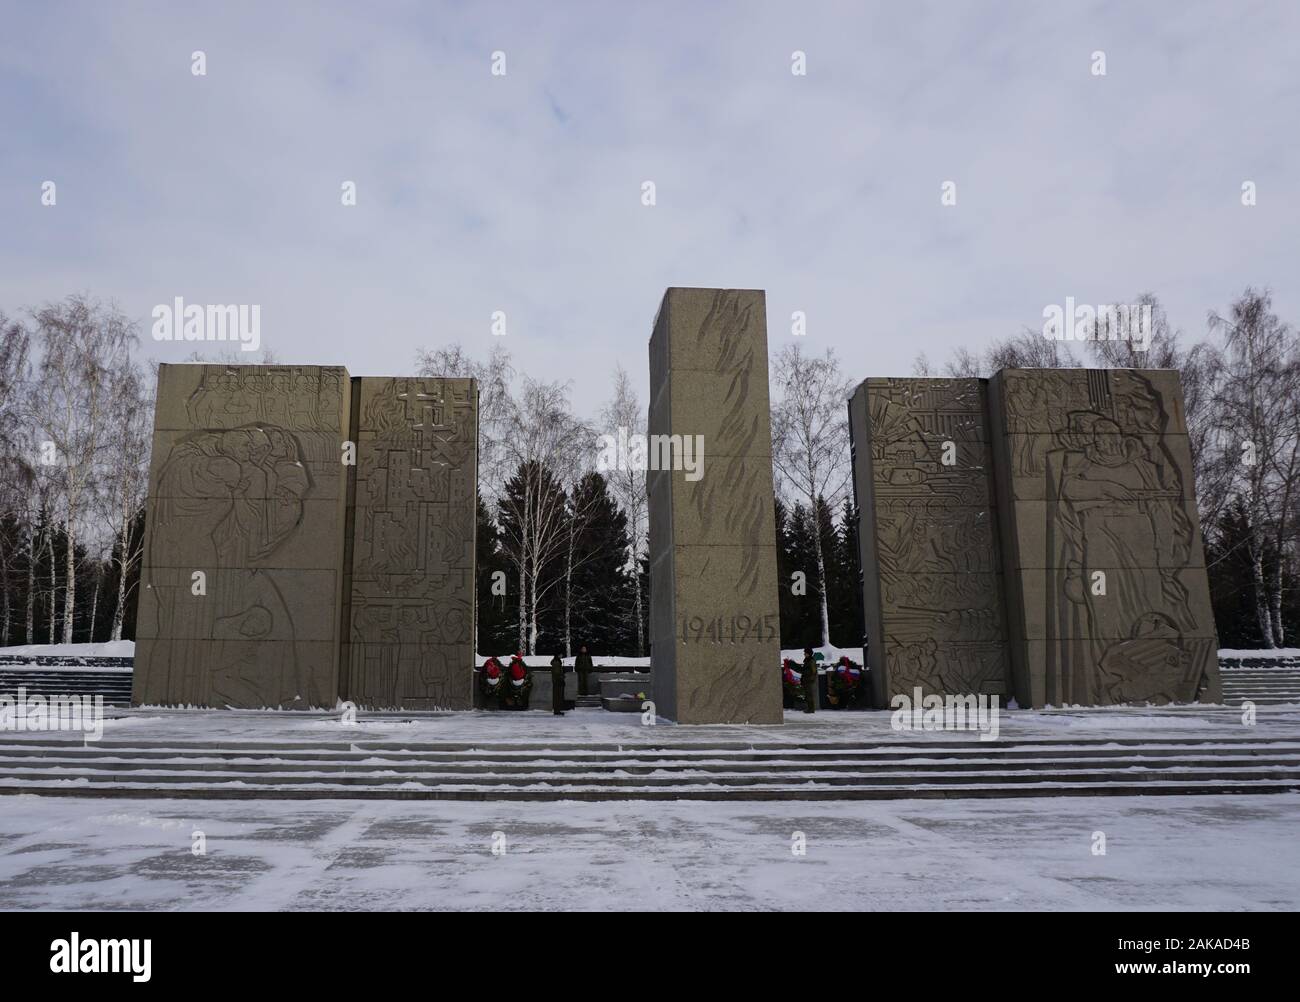 memorial in honor of soldiers who died during the Great Patriotic War Stock Photo